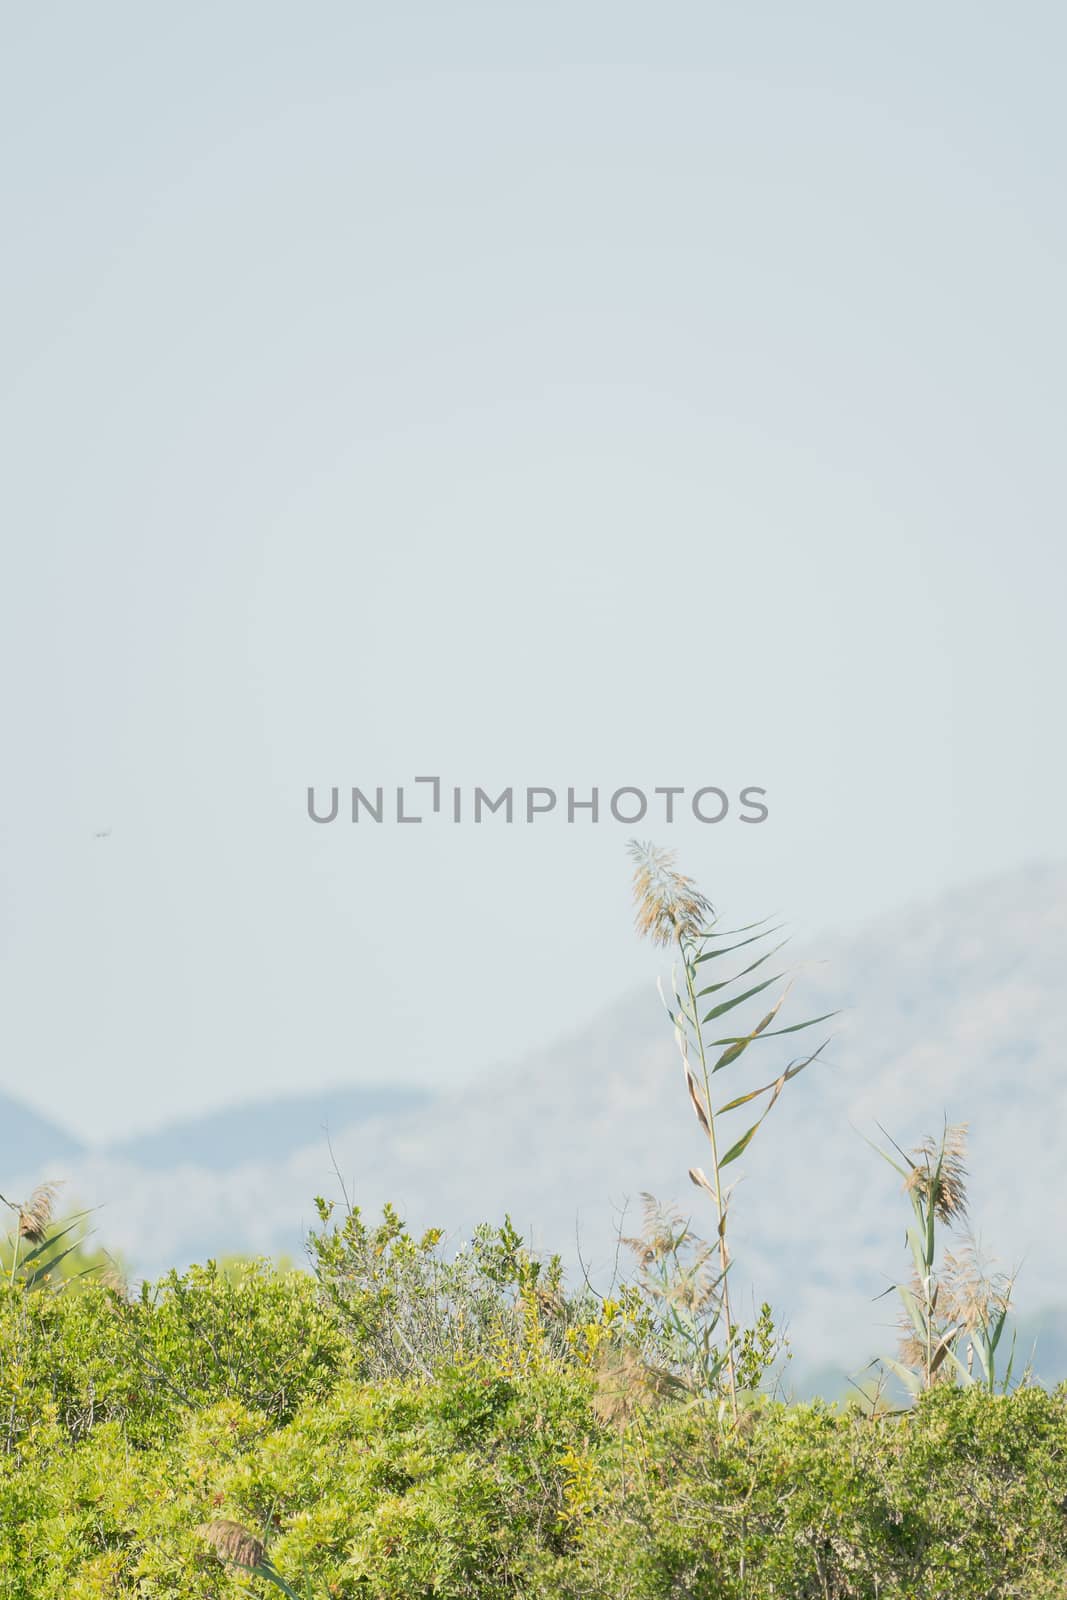 Grass in the foreground, sky and mountains in the background, ve by sandra_fotodesign